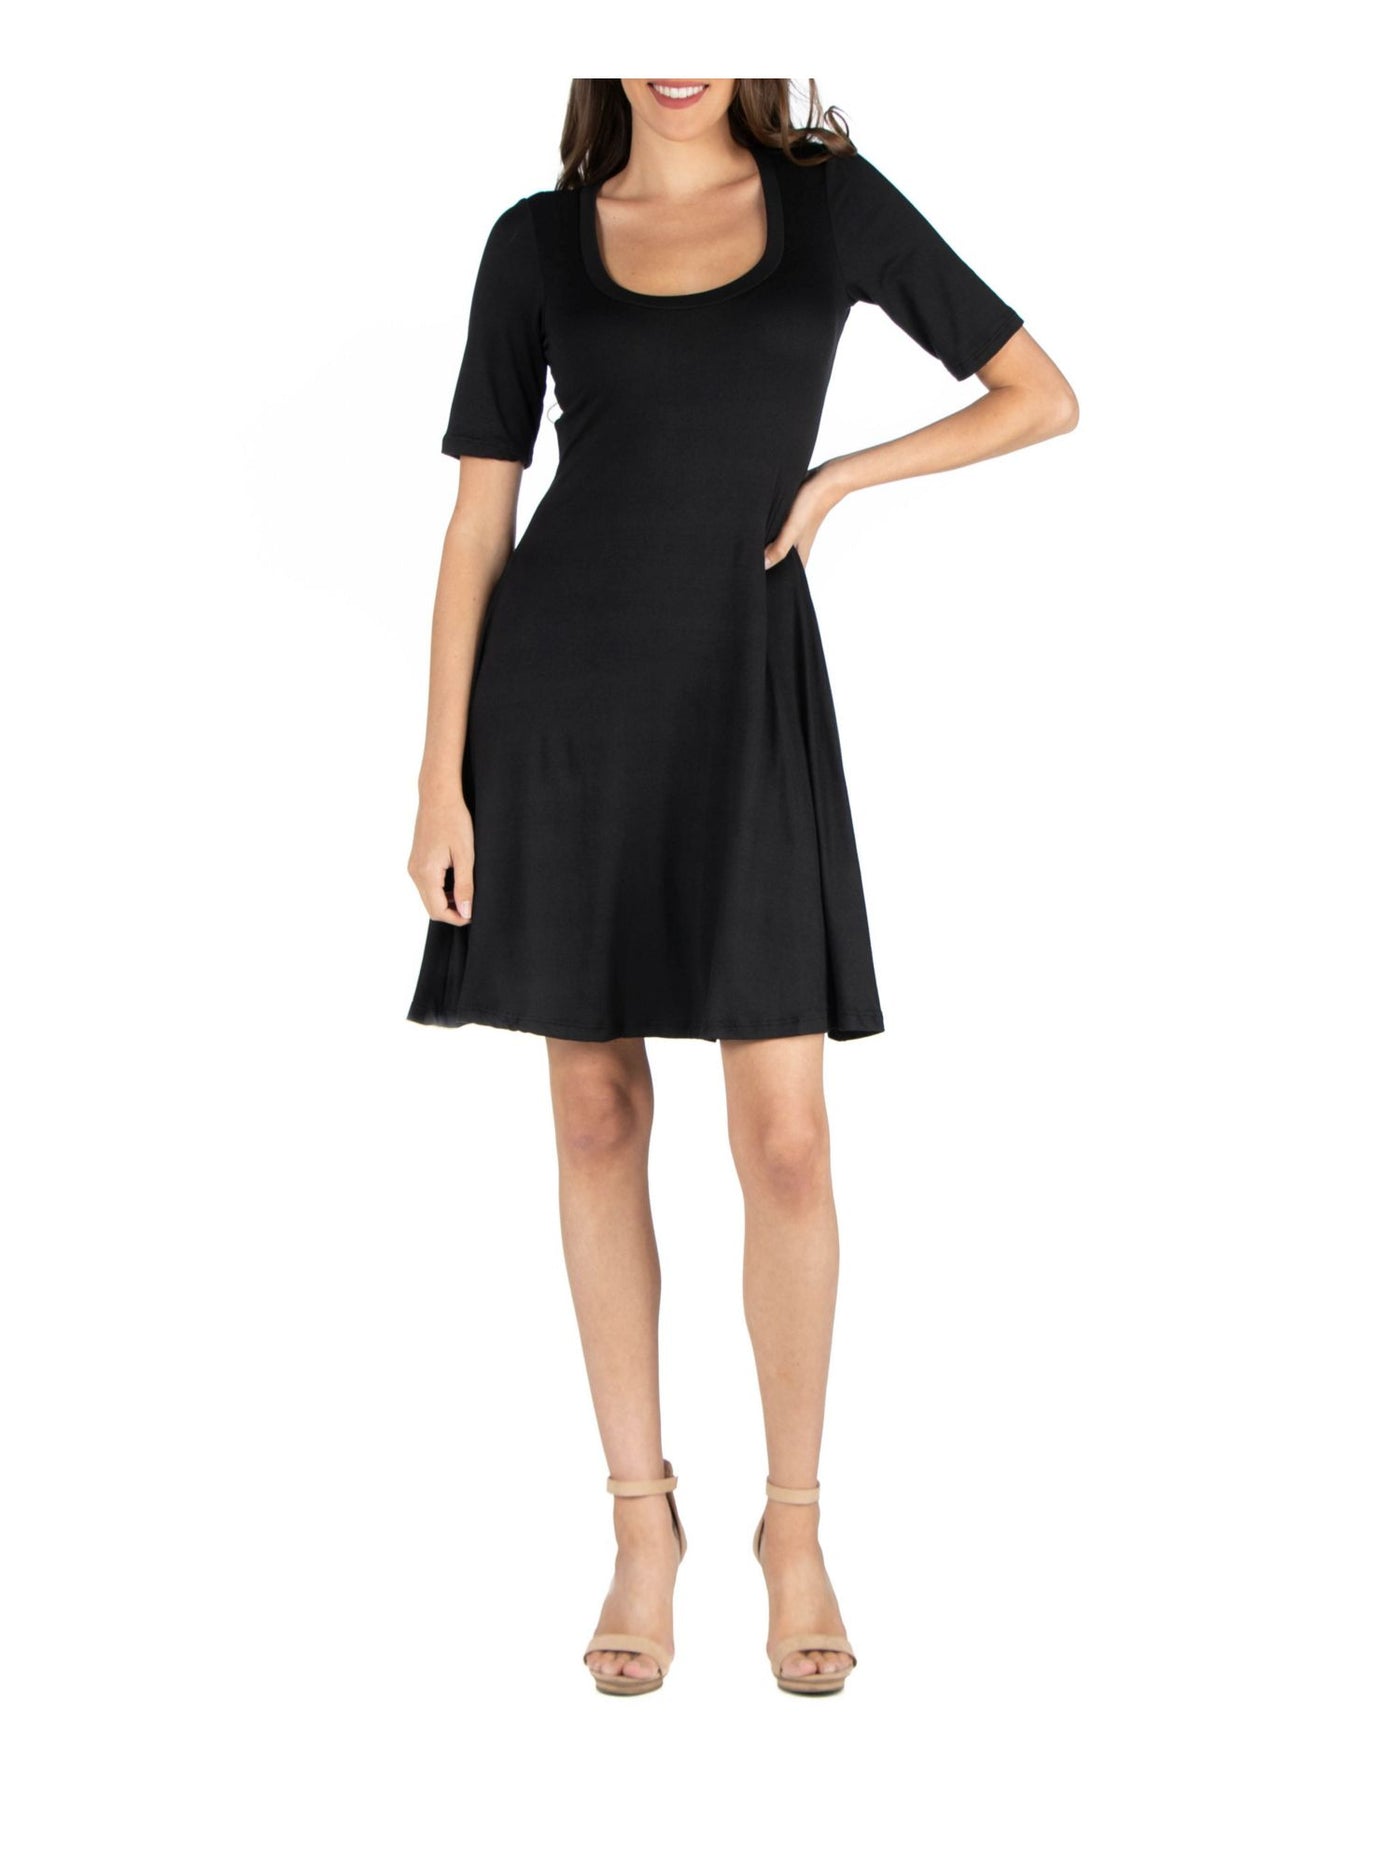 24 SEVEN COMFORT Womens Black Stretch Elbow Sleeve Scoop Neck Above The Knee Fit + Flare Dress S